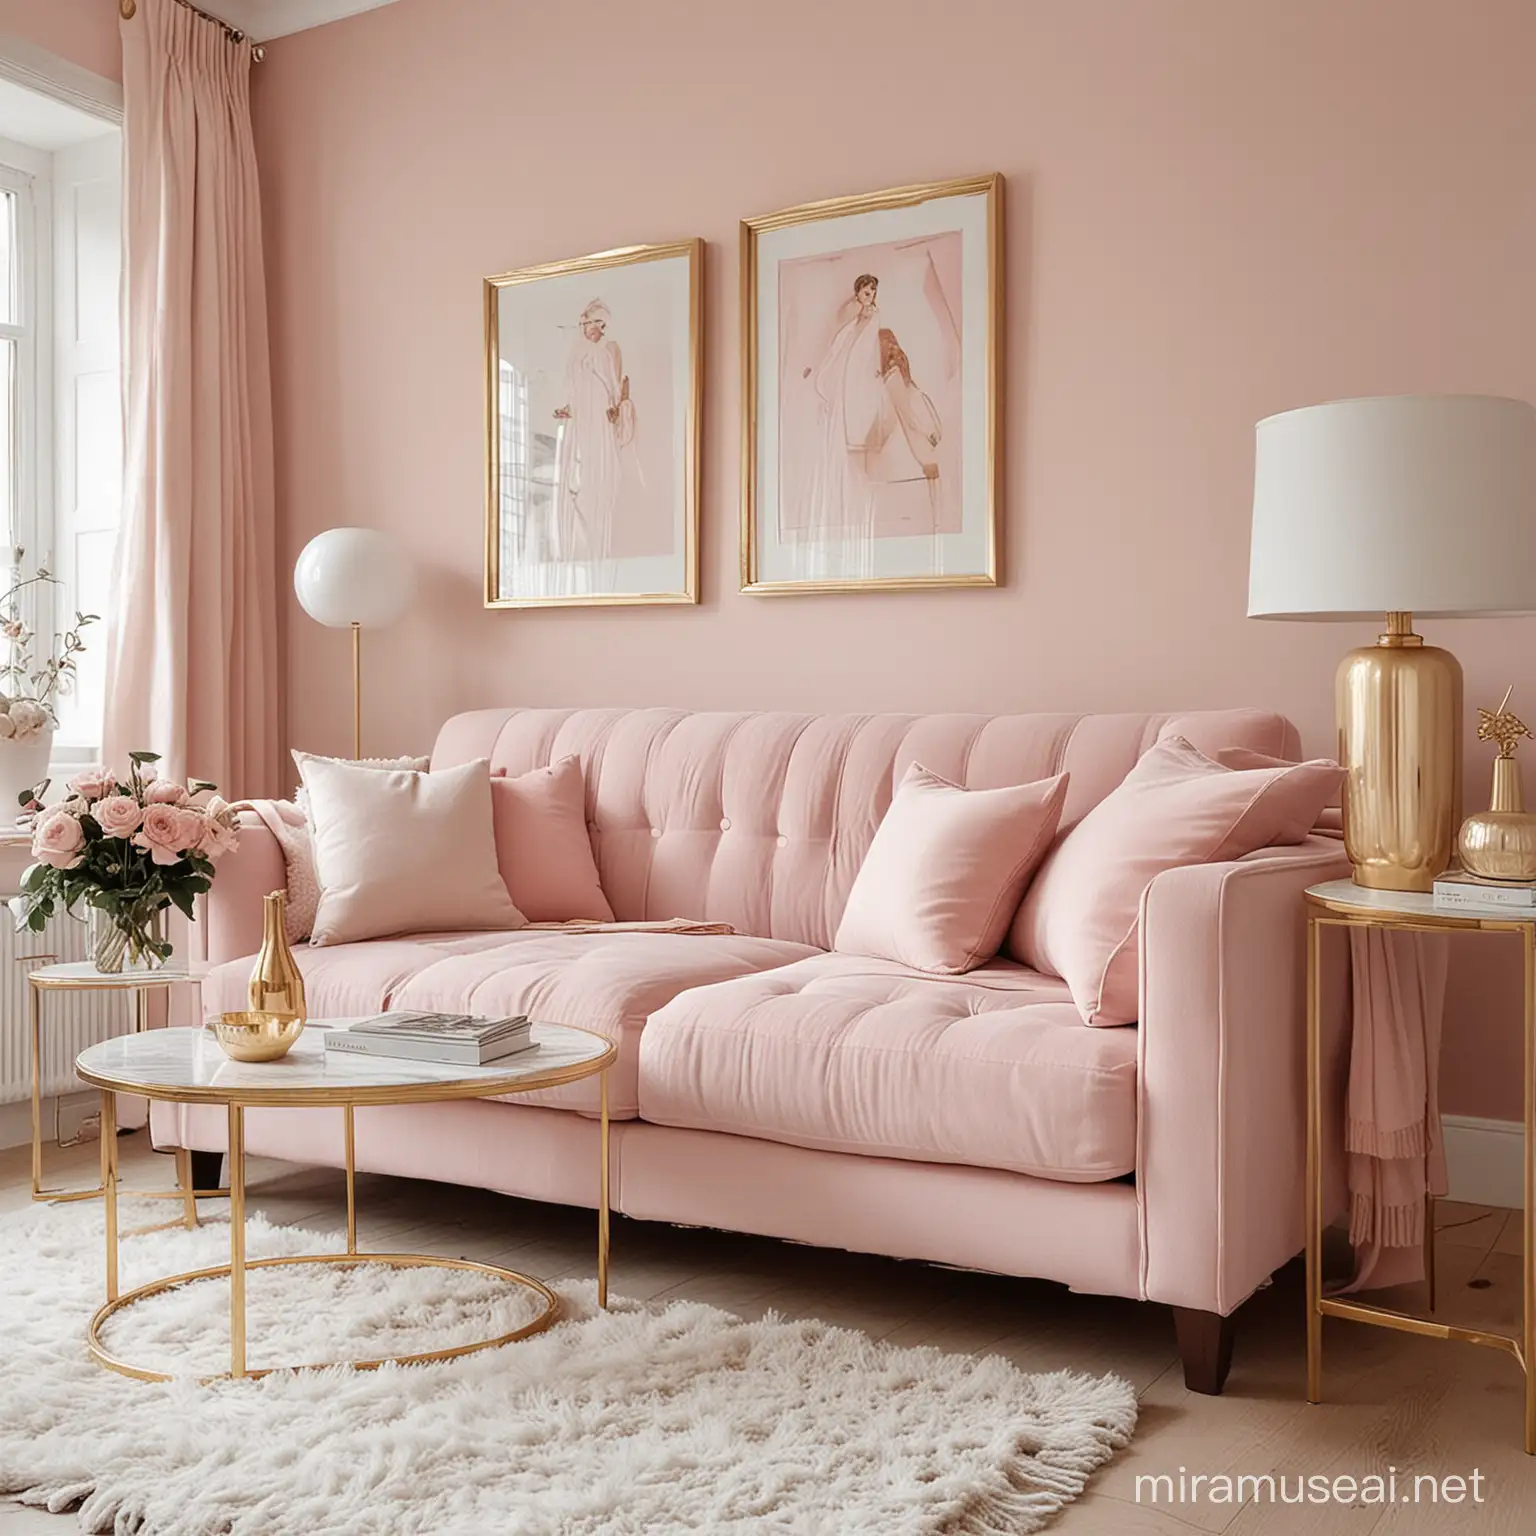 Blush Pink and Gold home interior